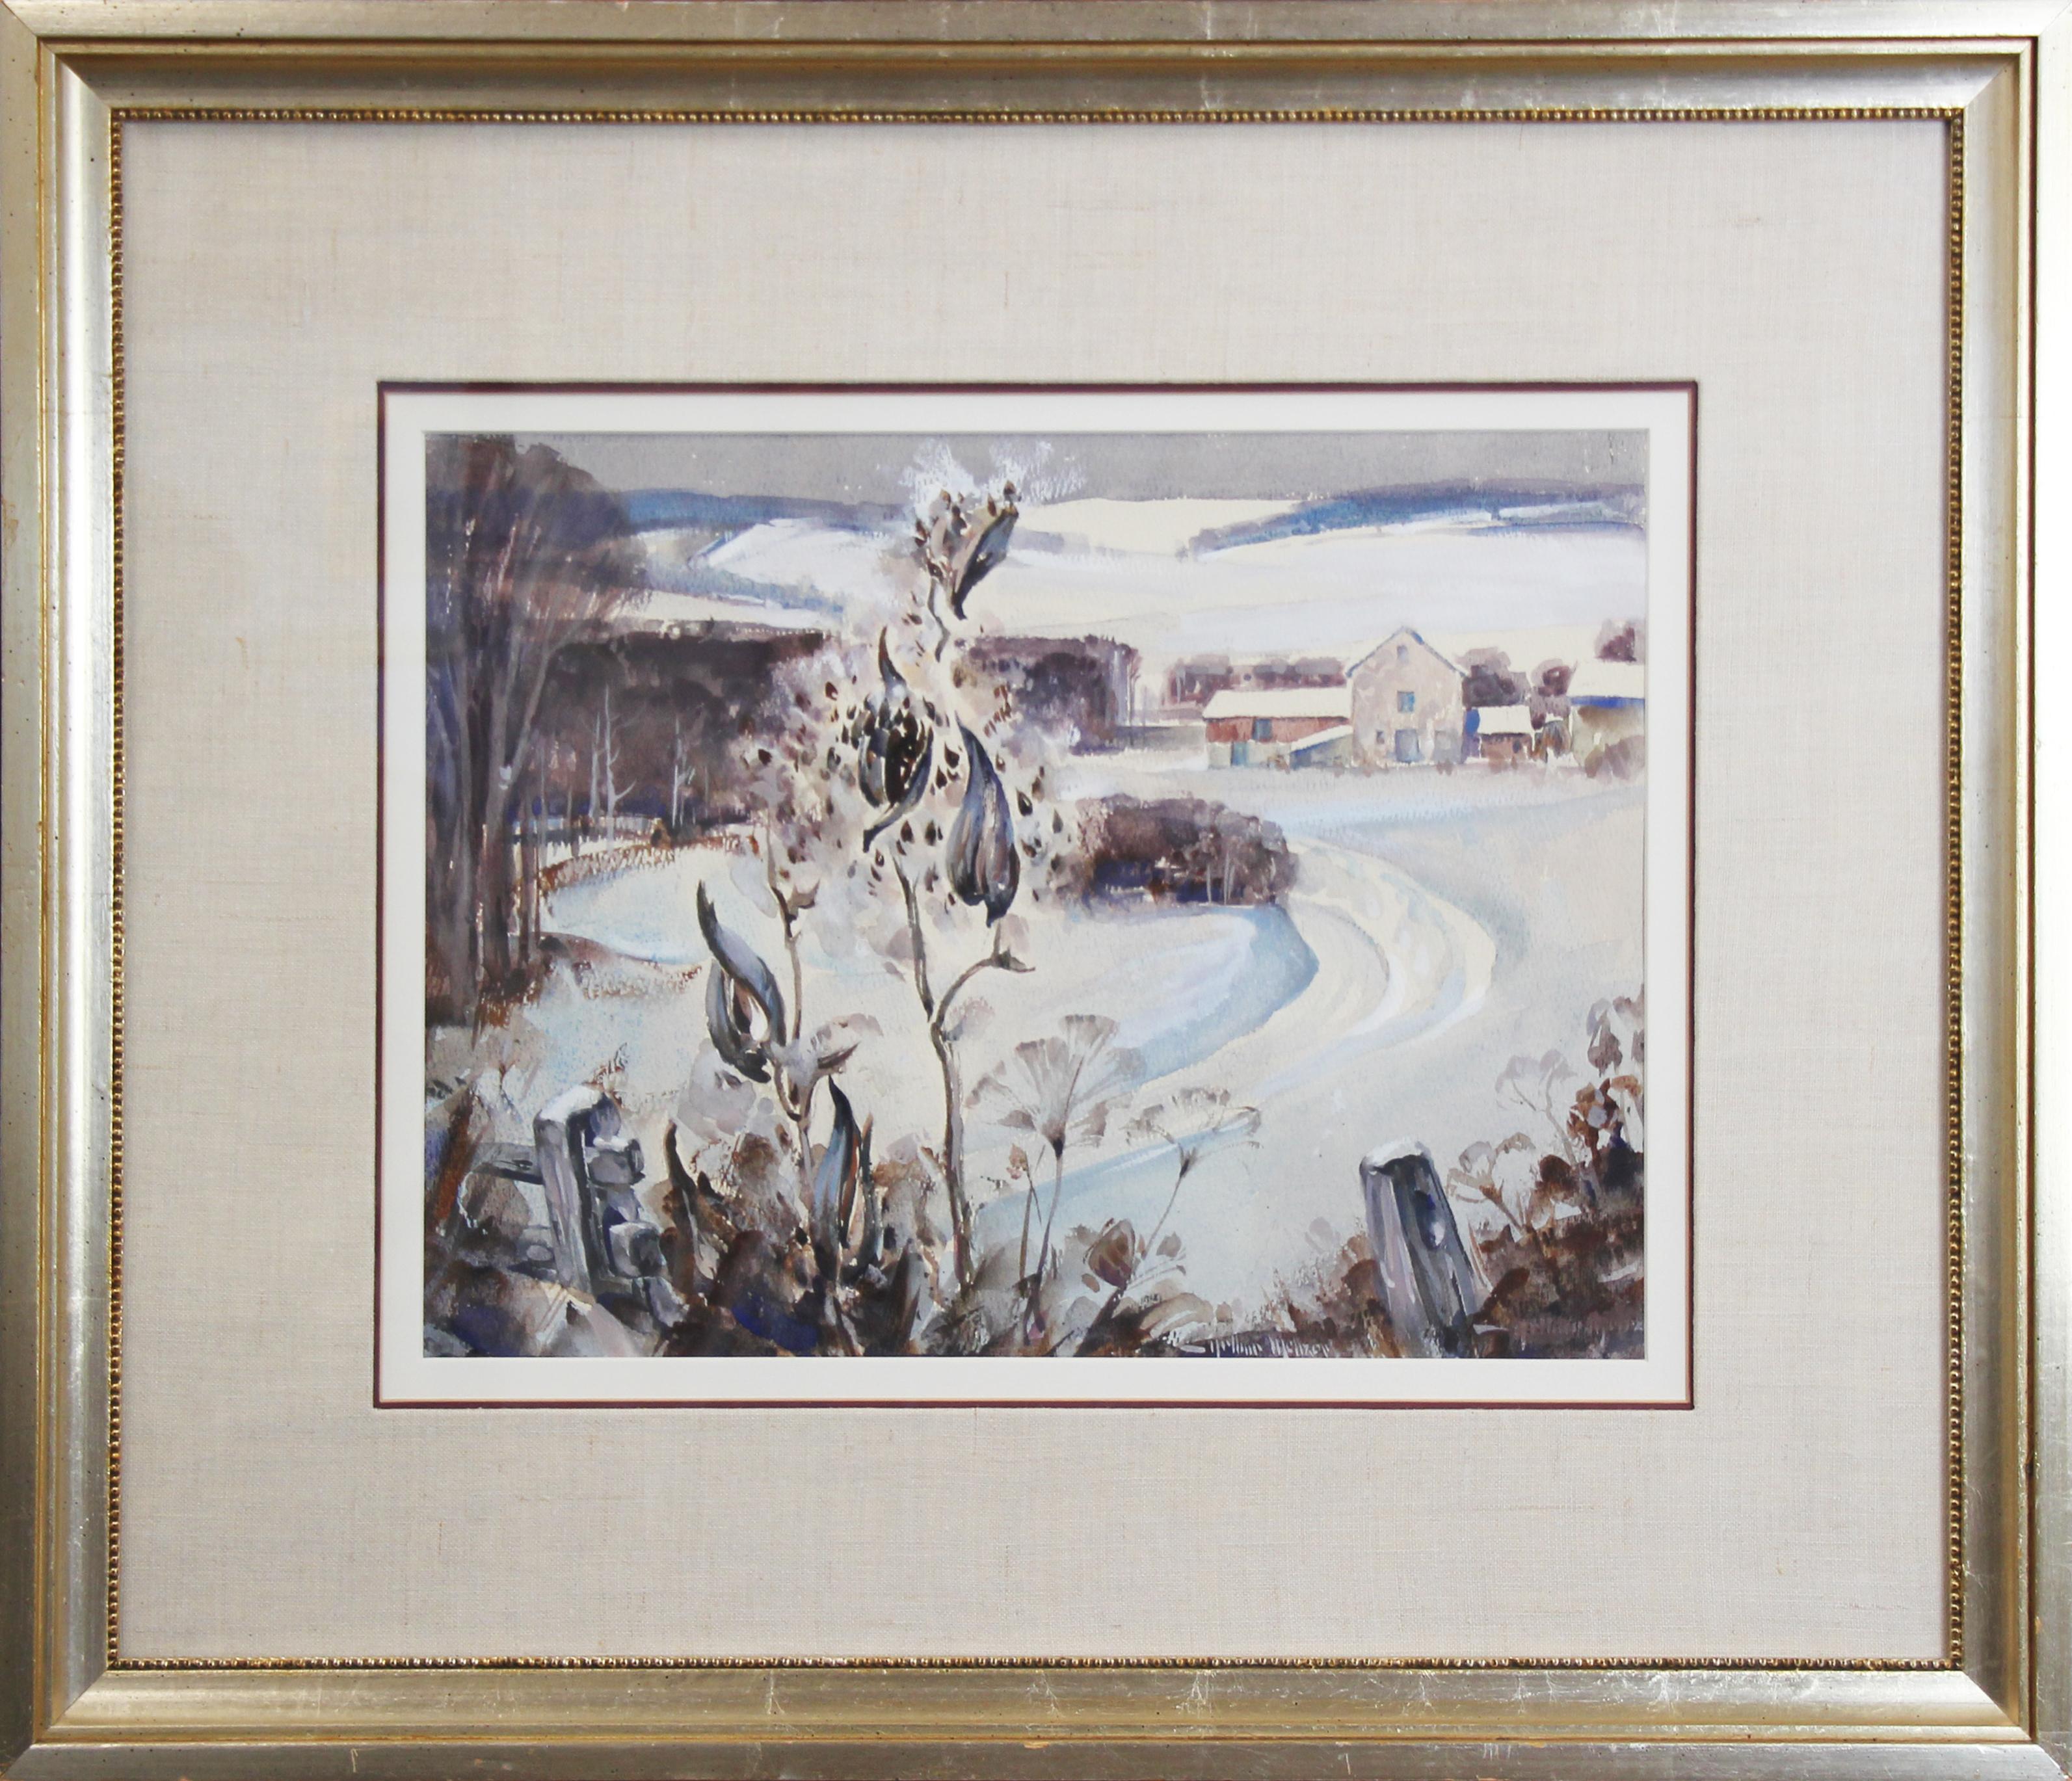 Aesclepius in Foreground, Winter Landscape by Pennsylvania Impressionist - Art by Arthur Meltzer